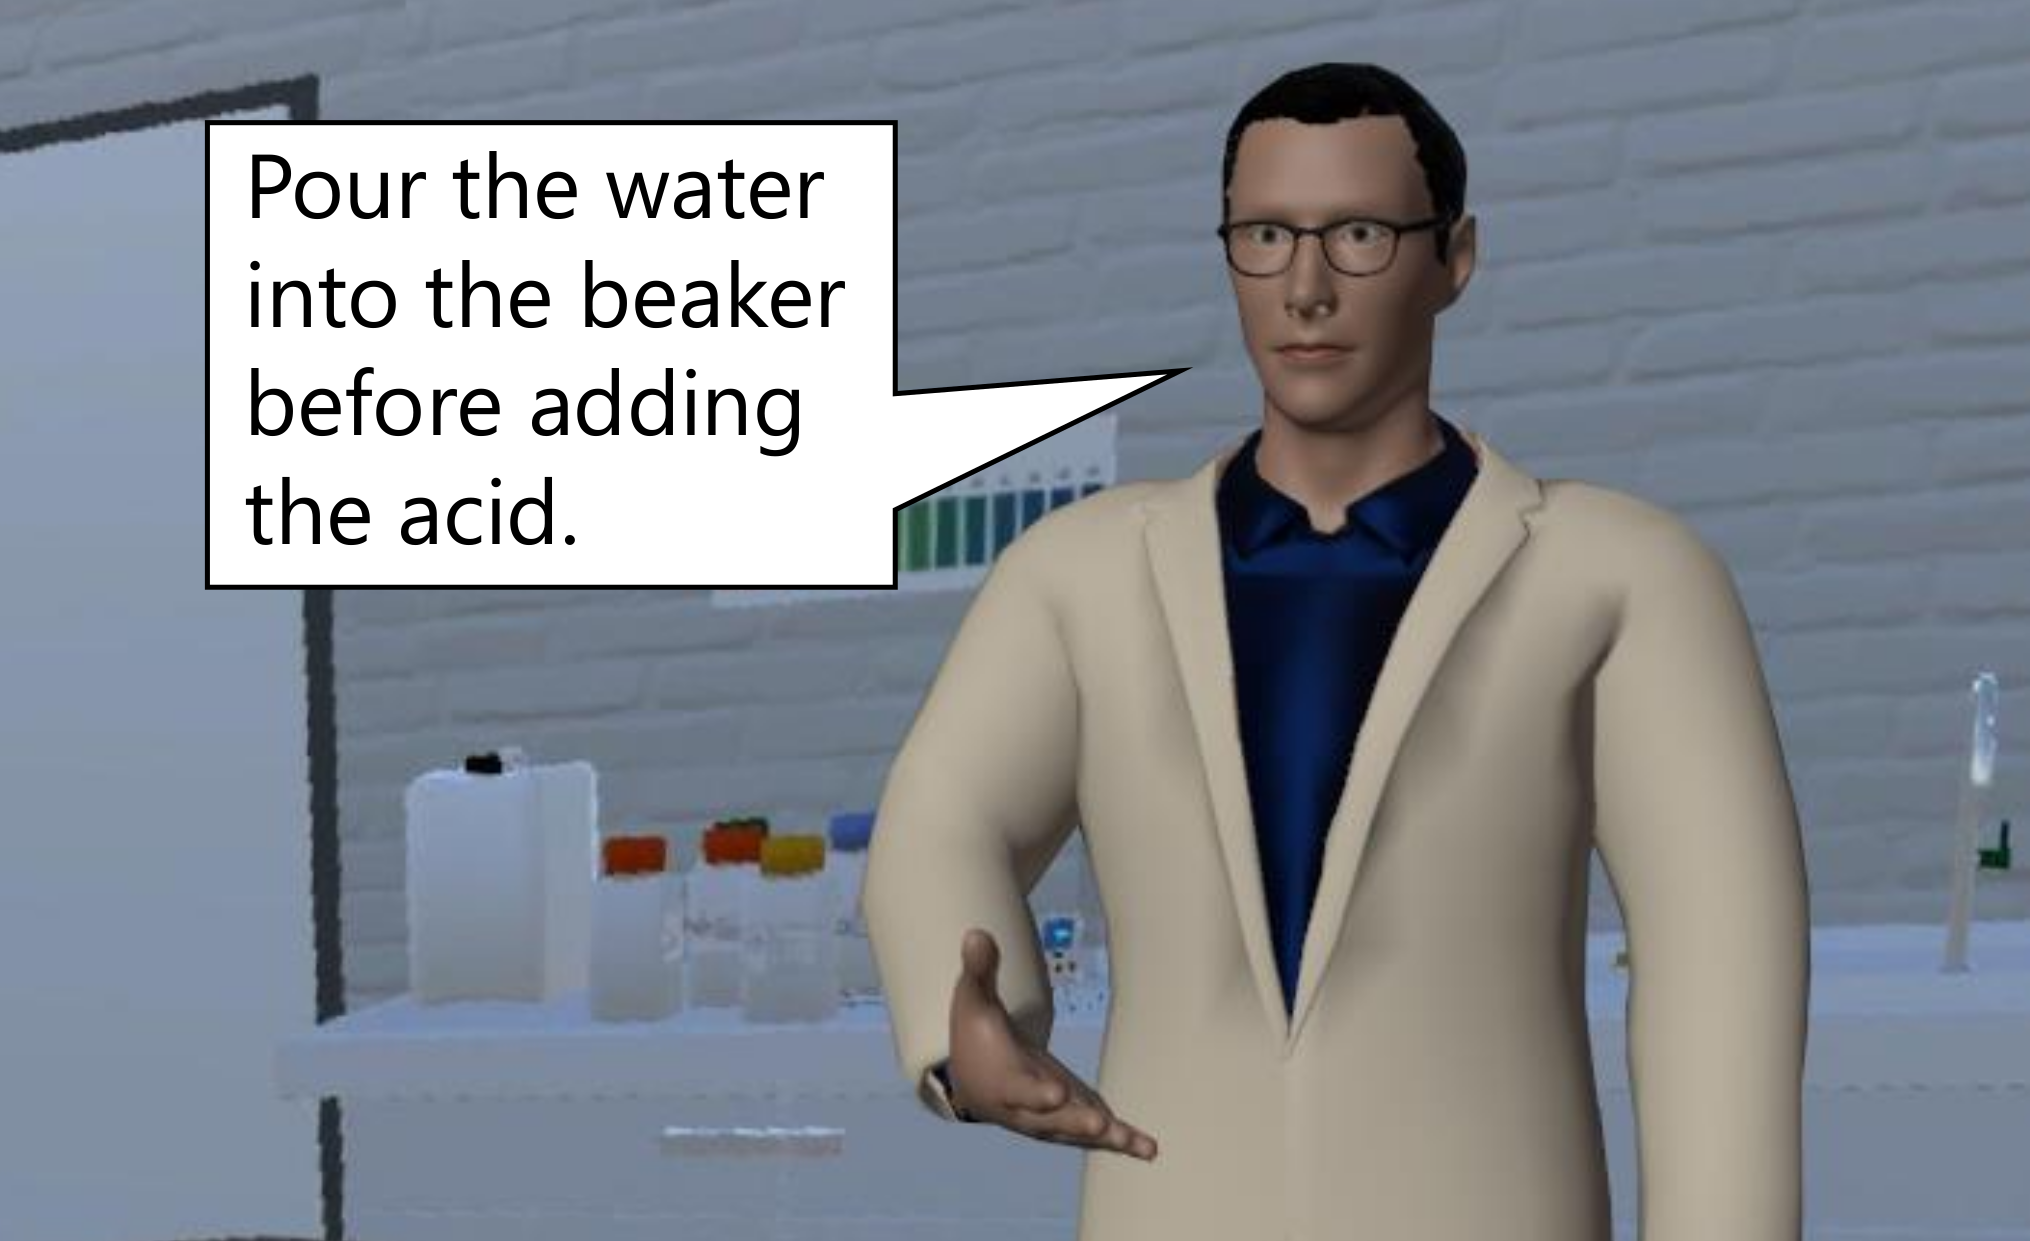 A mock-up of the virtual tutor. The tutor stands in the virtual laboratory and explains to a student that, when mixing water and an acid, the water needs to be poured into the beaker first.